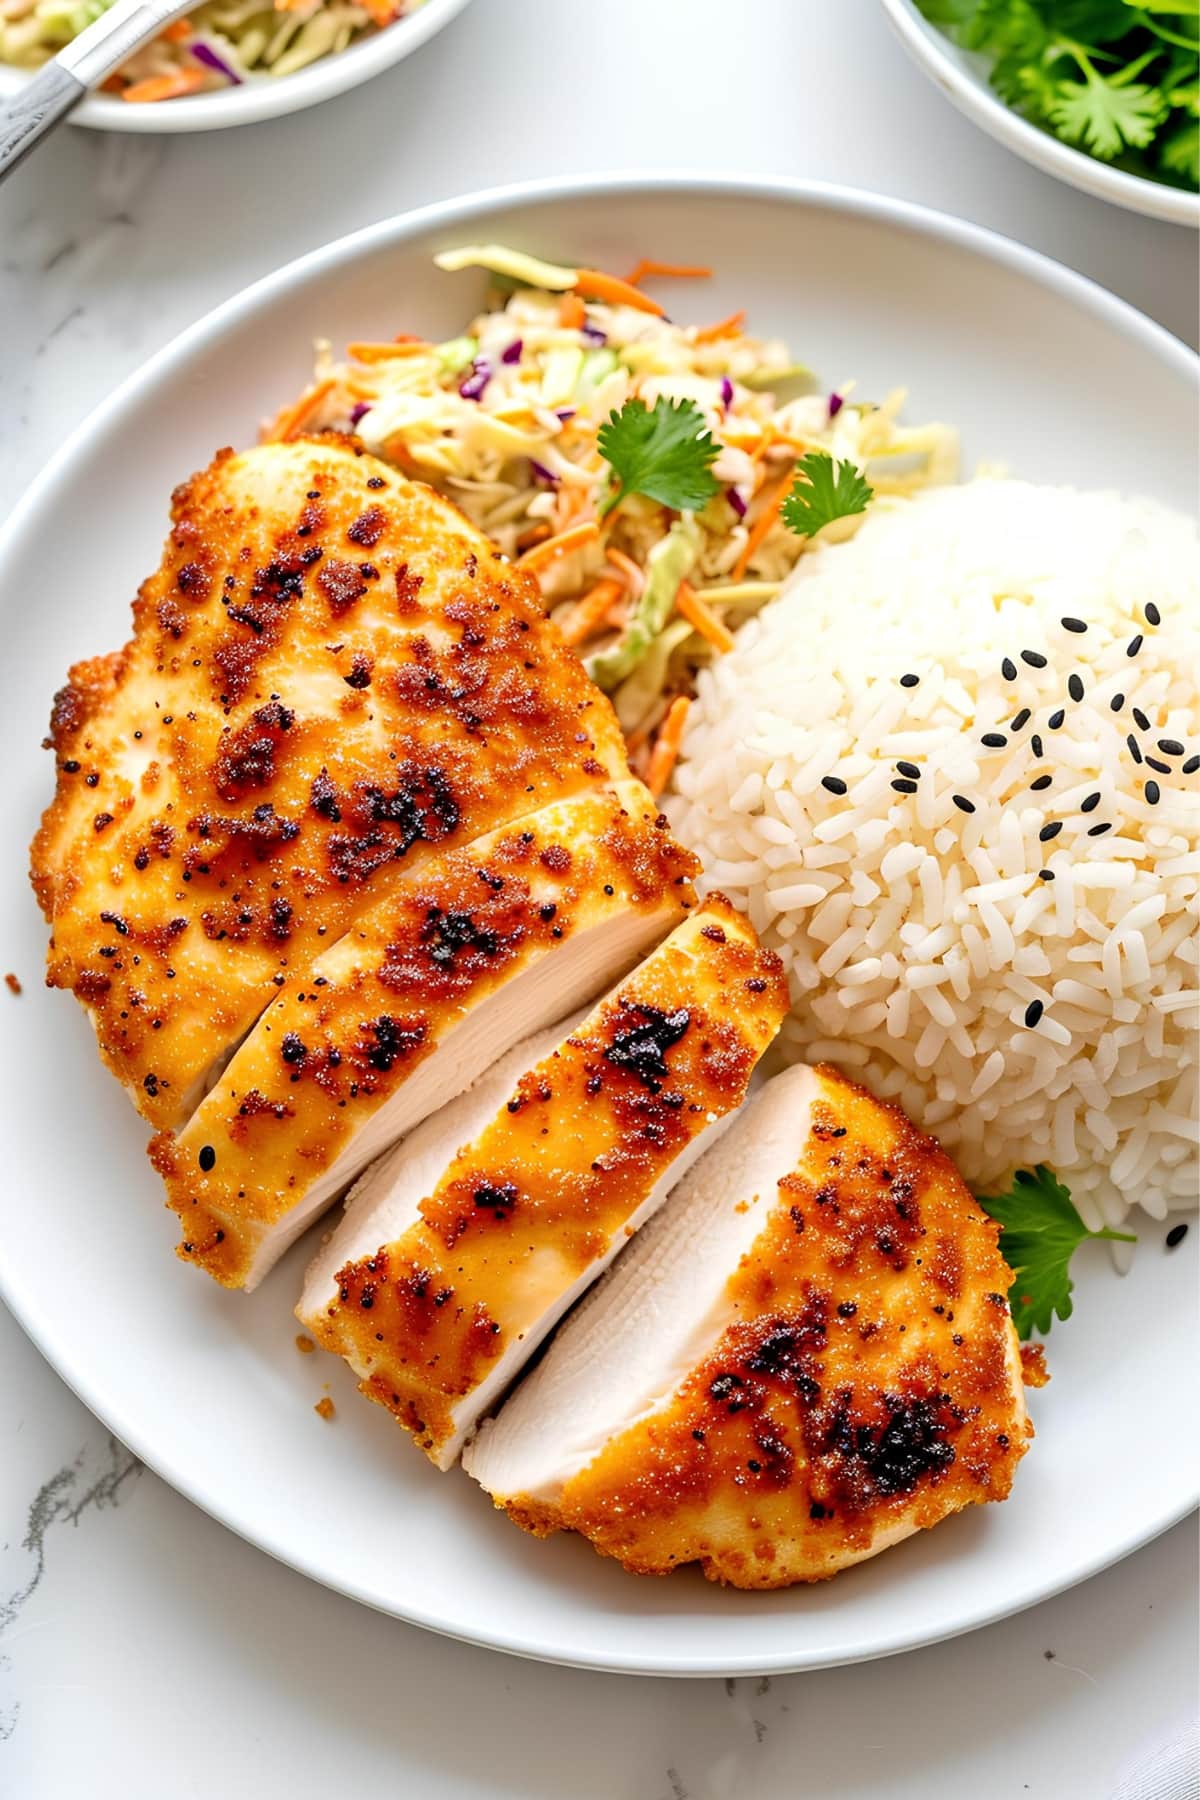 Easy Air Fryer Chicken Breasts (Juicy and Tender) - Insanely Good